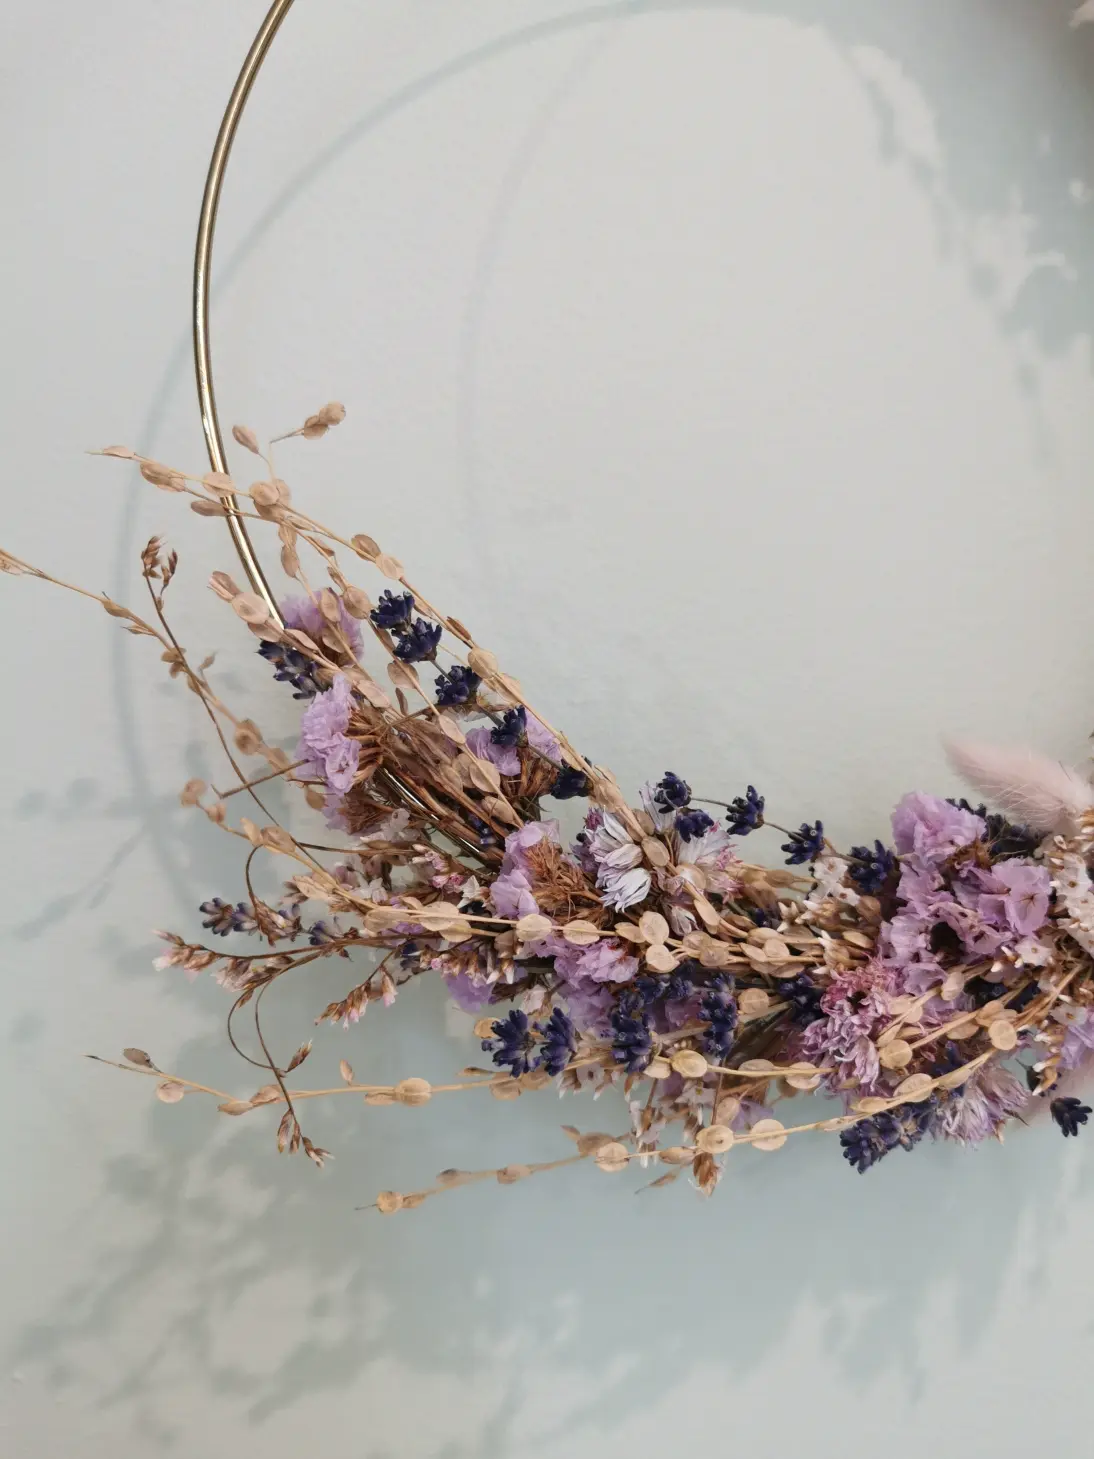 Pastel, light with an accent of grasses. Made with dried: blewworms, bayberry, lavender and field grasses.